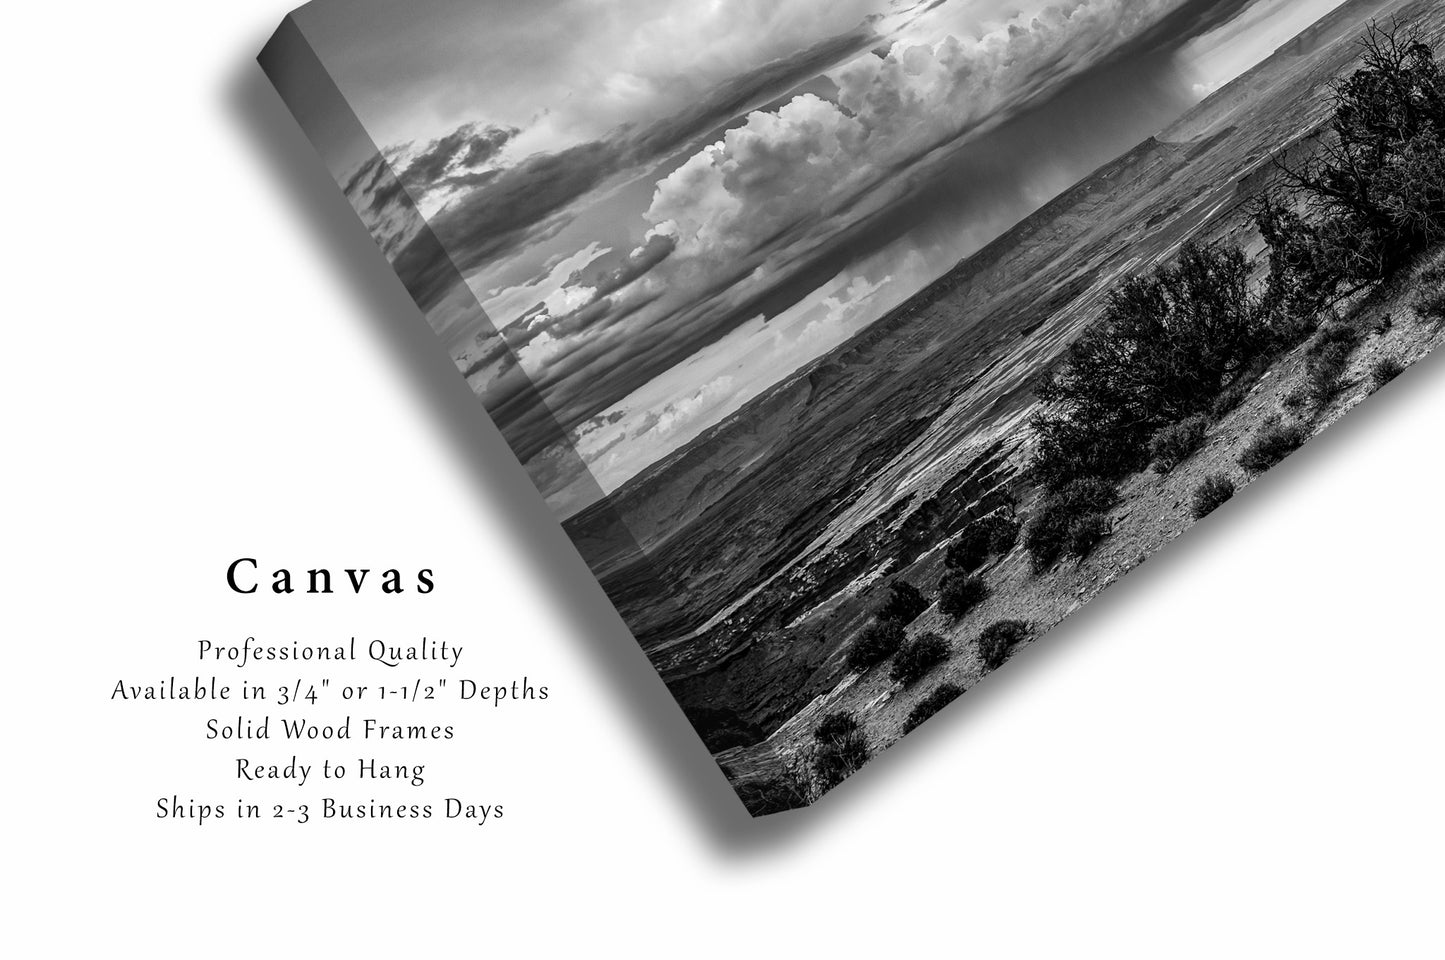 Canvas Wall Art | Canyonlands National Park Photo | Black and White Gallery Wrap | Utah Photography | Desert Landscape Picture | Western Decor